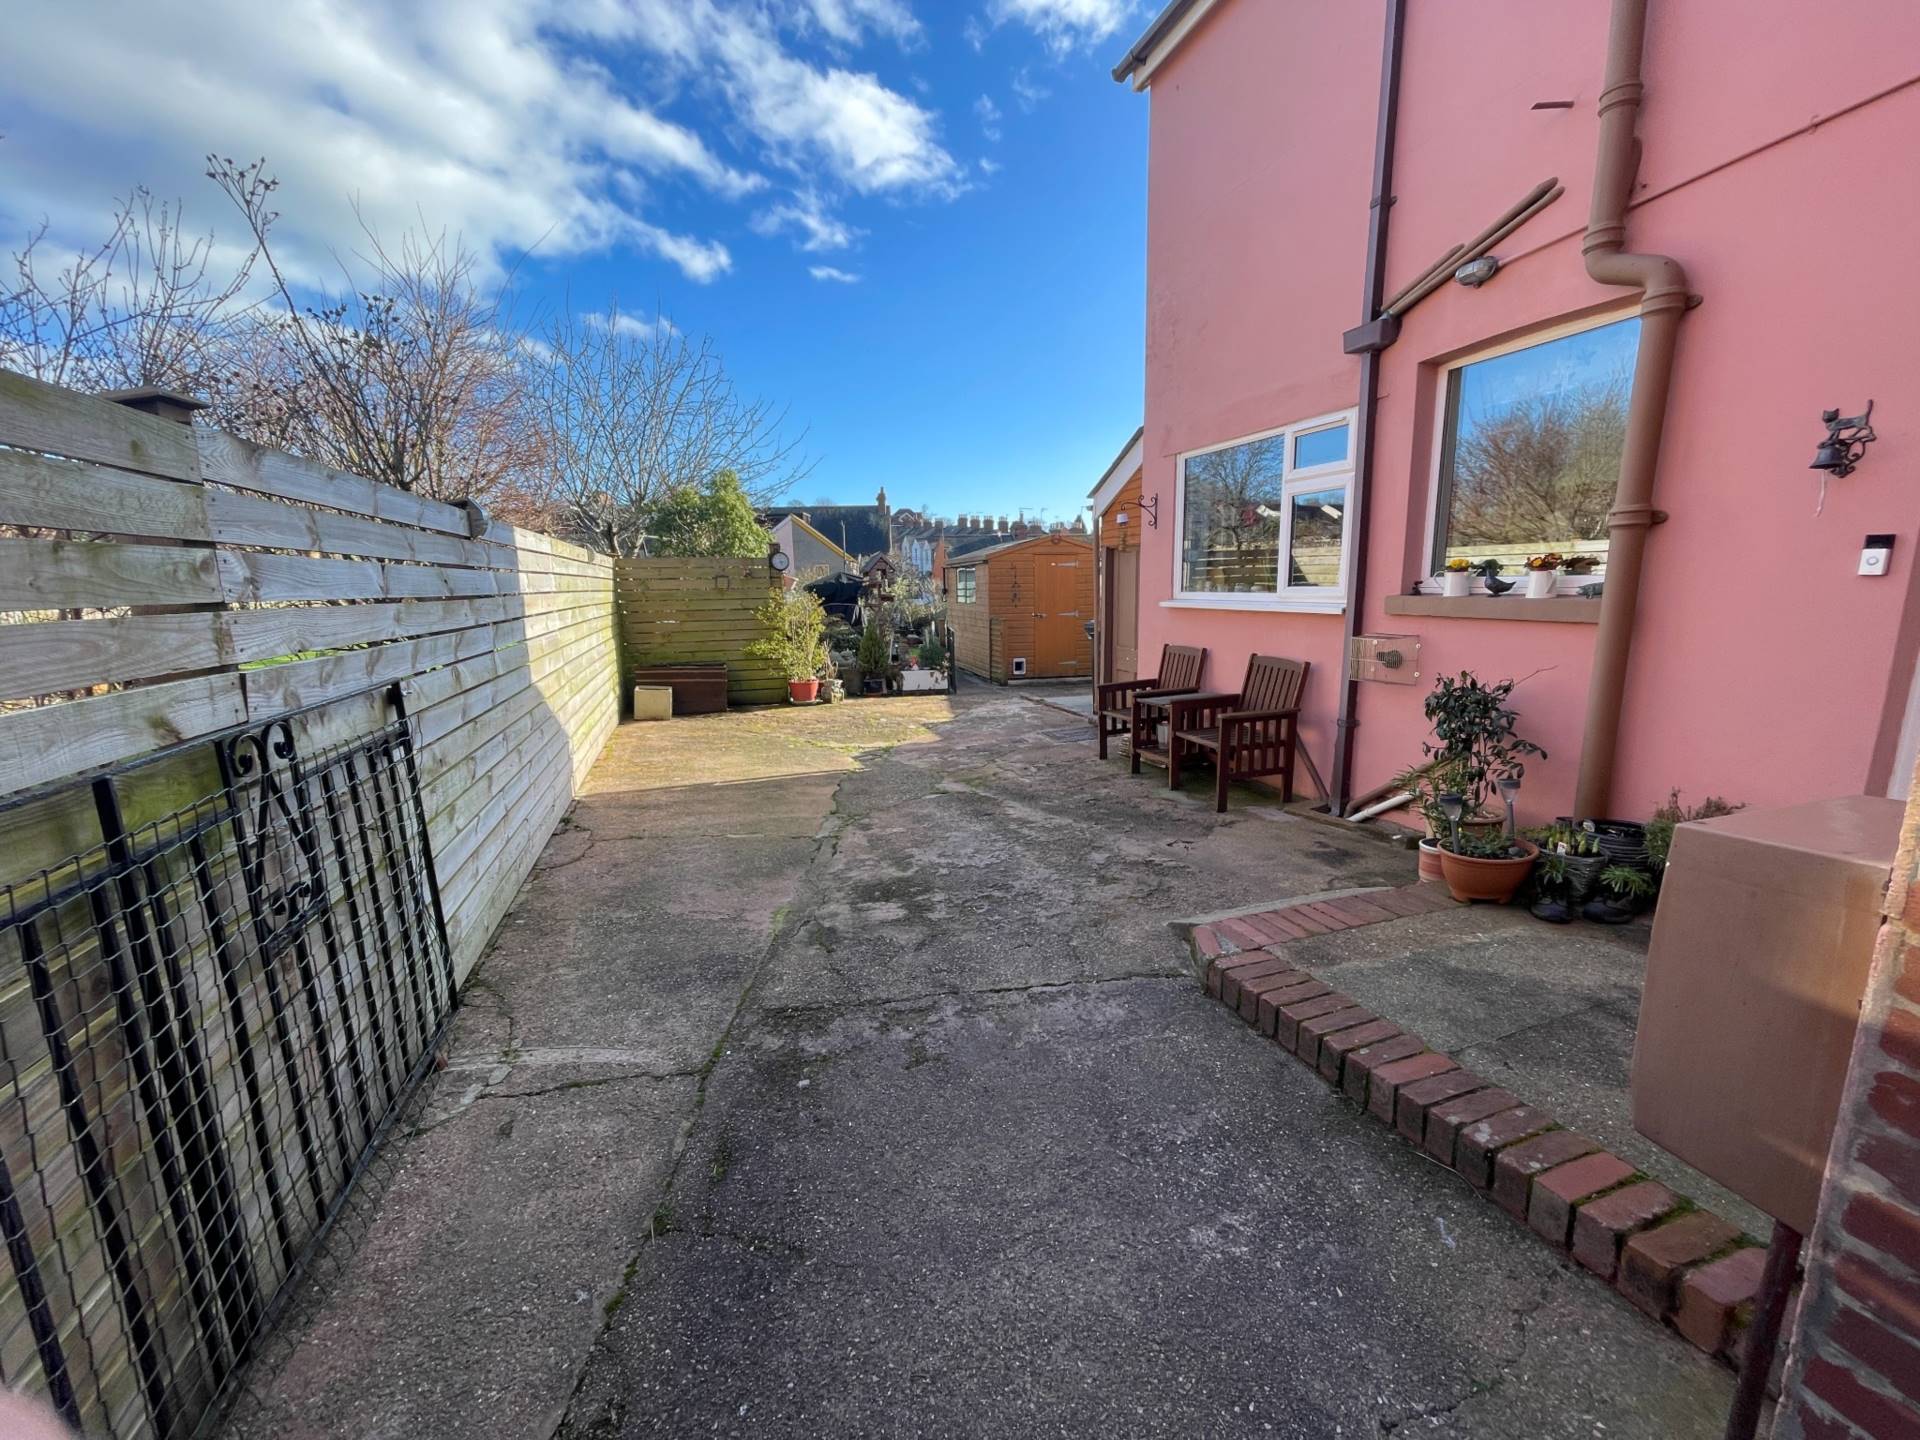 St Johns Road, Exmouth, Image 12